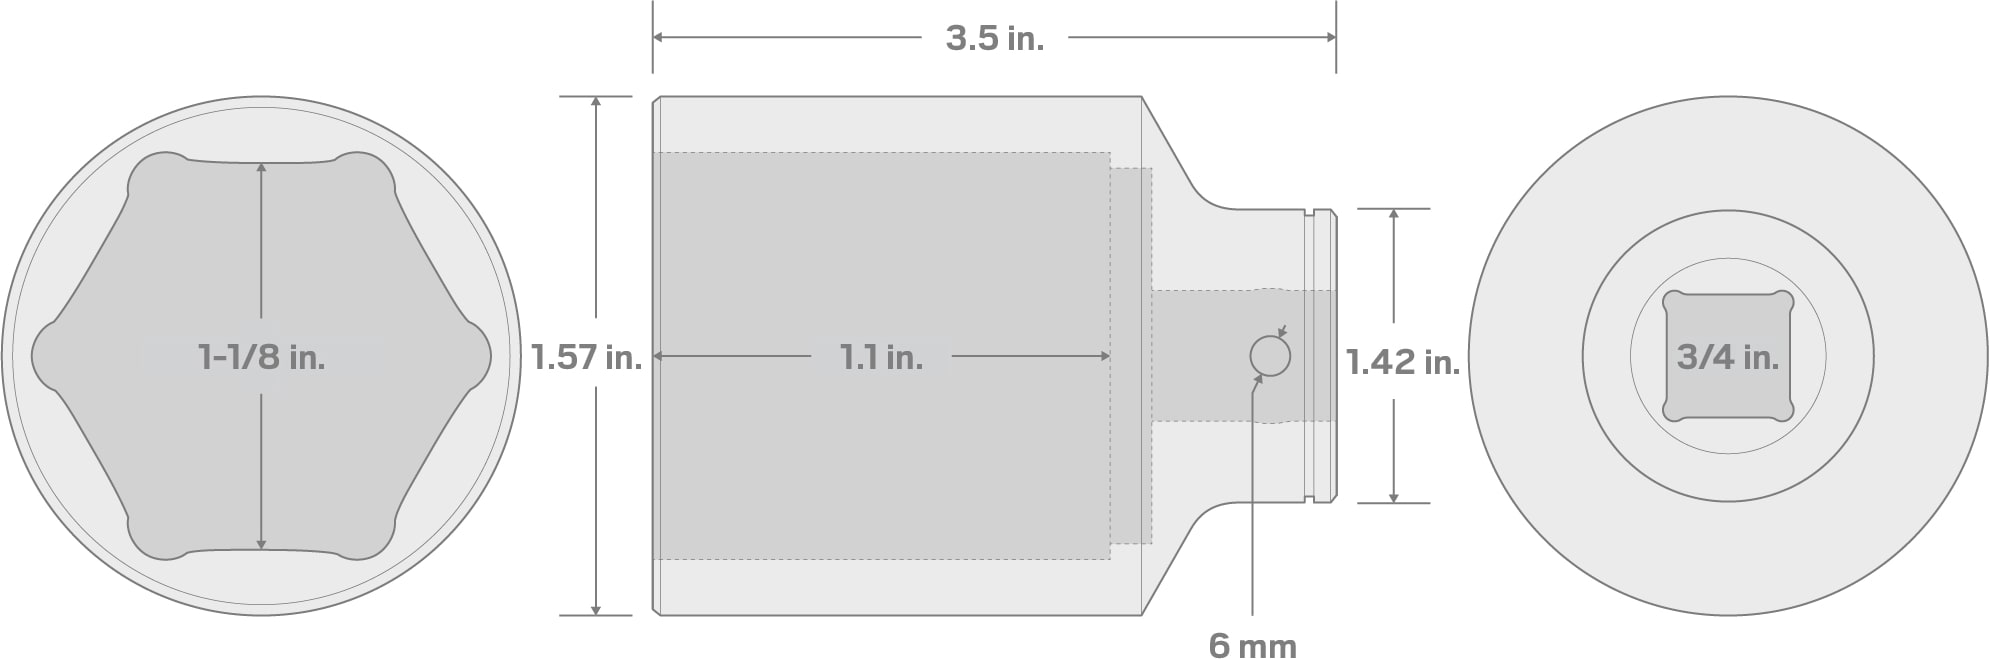 Specs for 3/4 Inch Drive x 1-1/8 Inch Deep 6-Point Socket